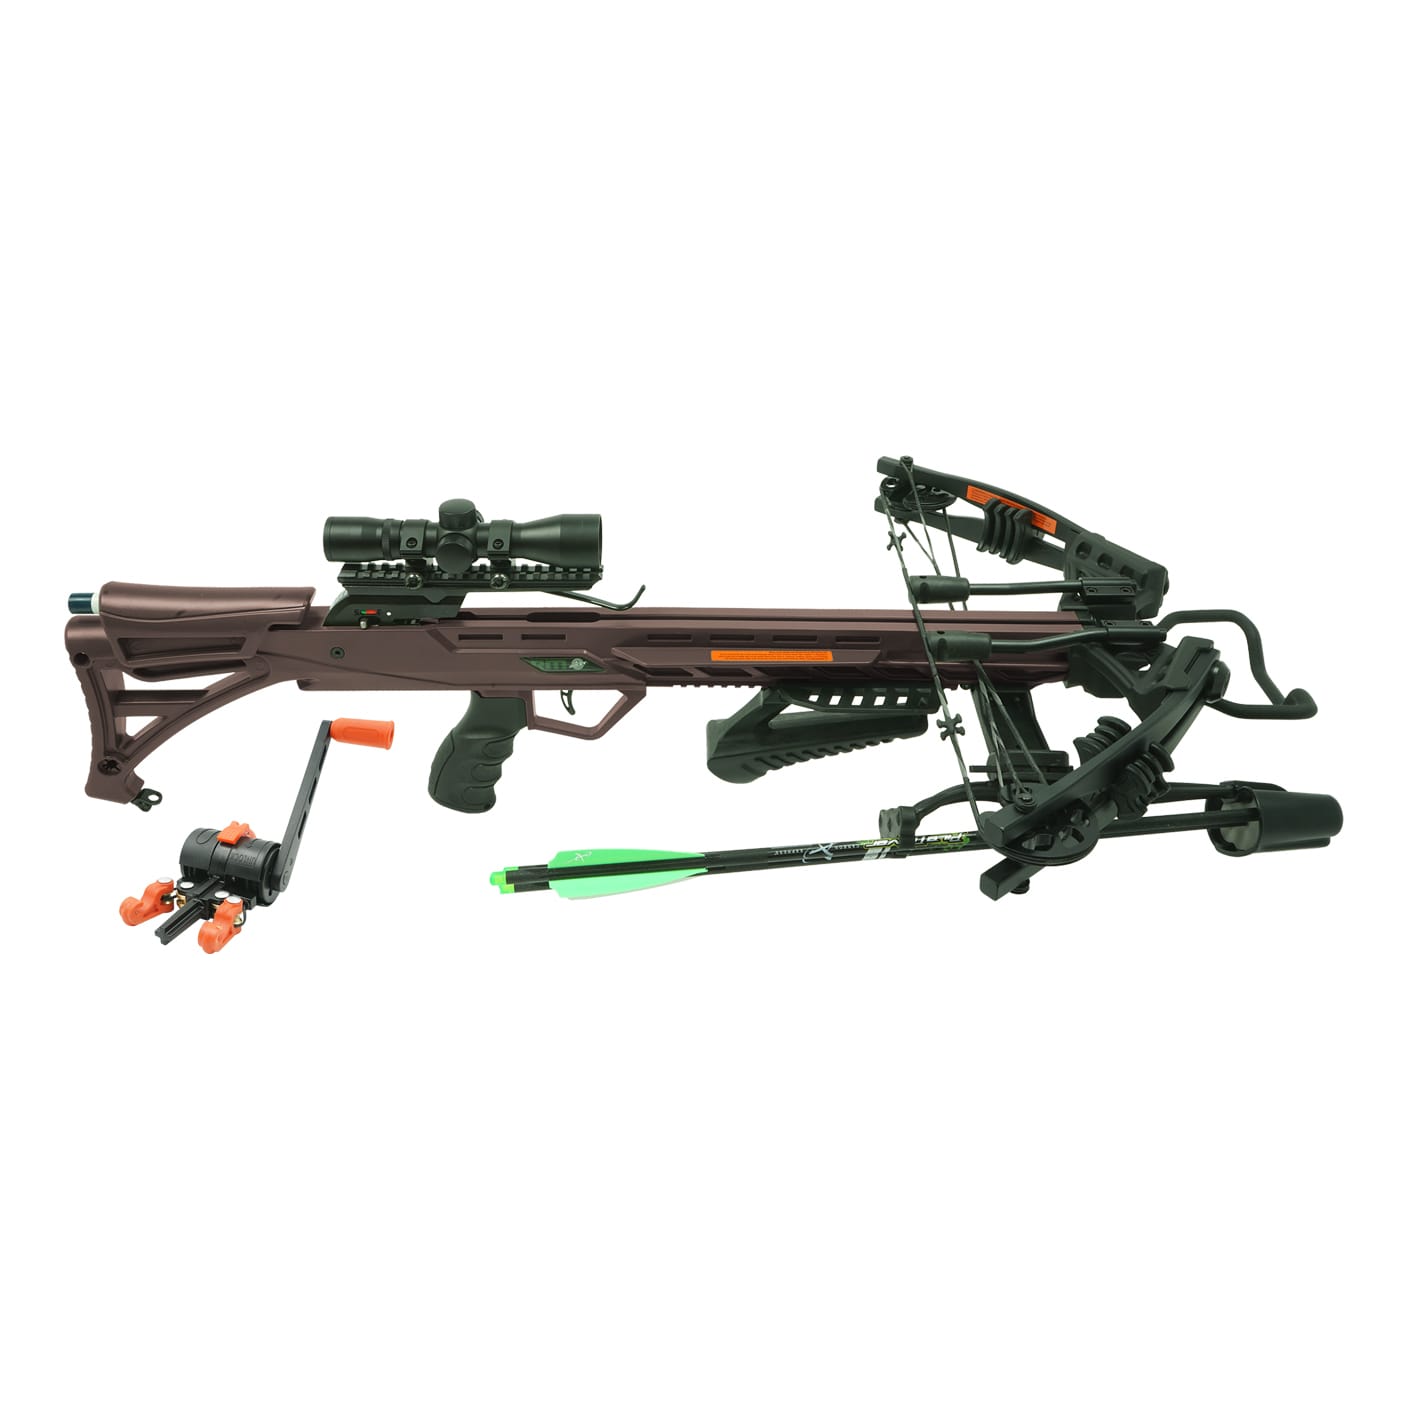 Killer Instinct Bone Collector 415 Crossbow Package With Crank